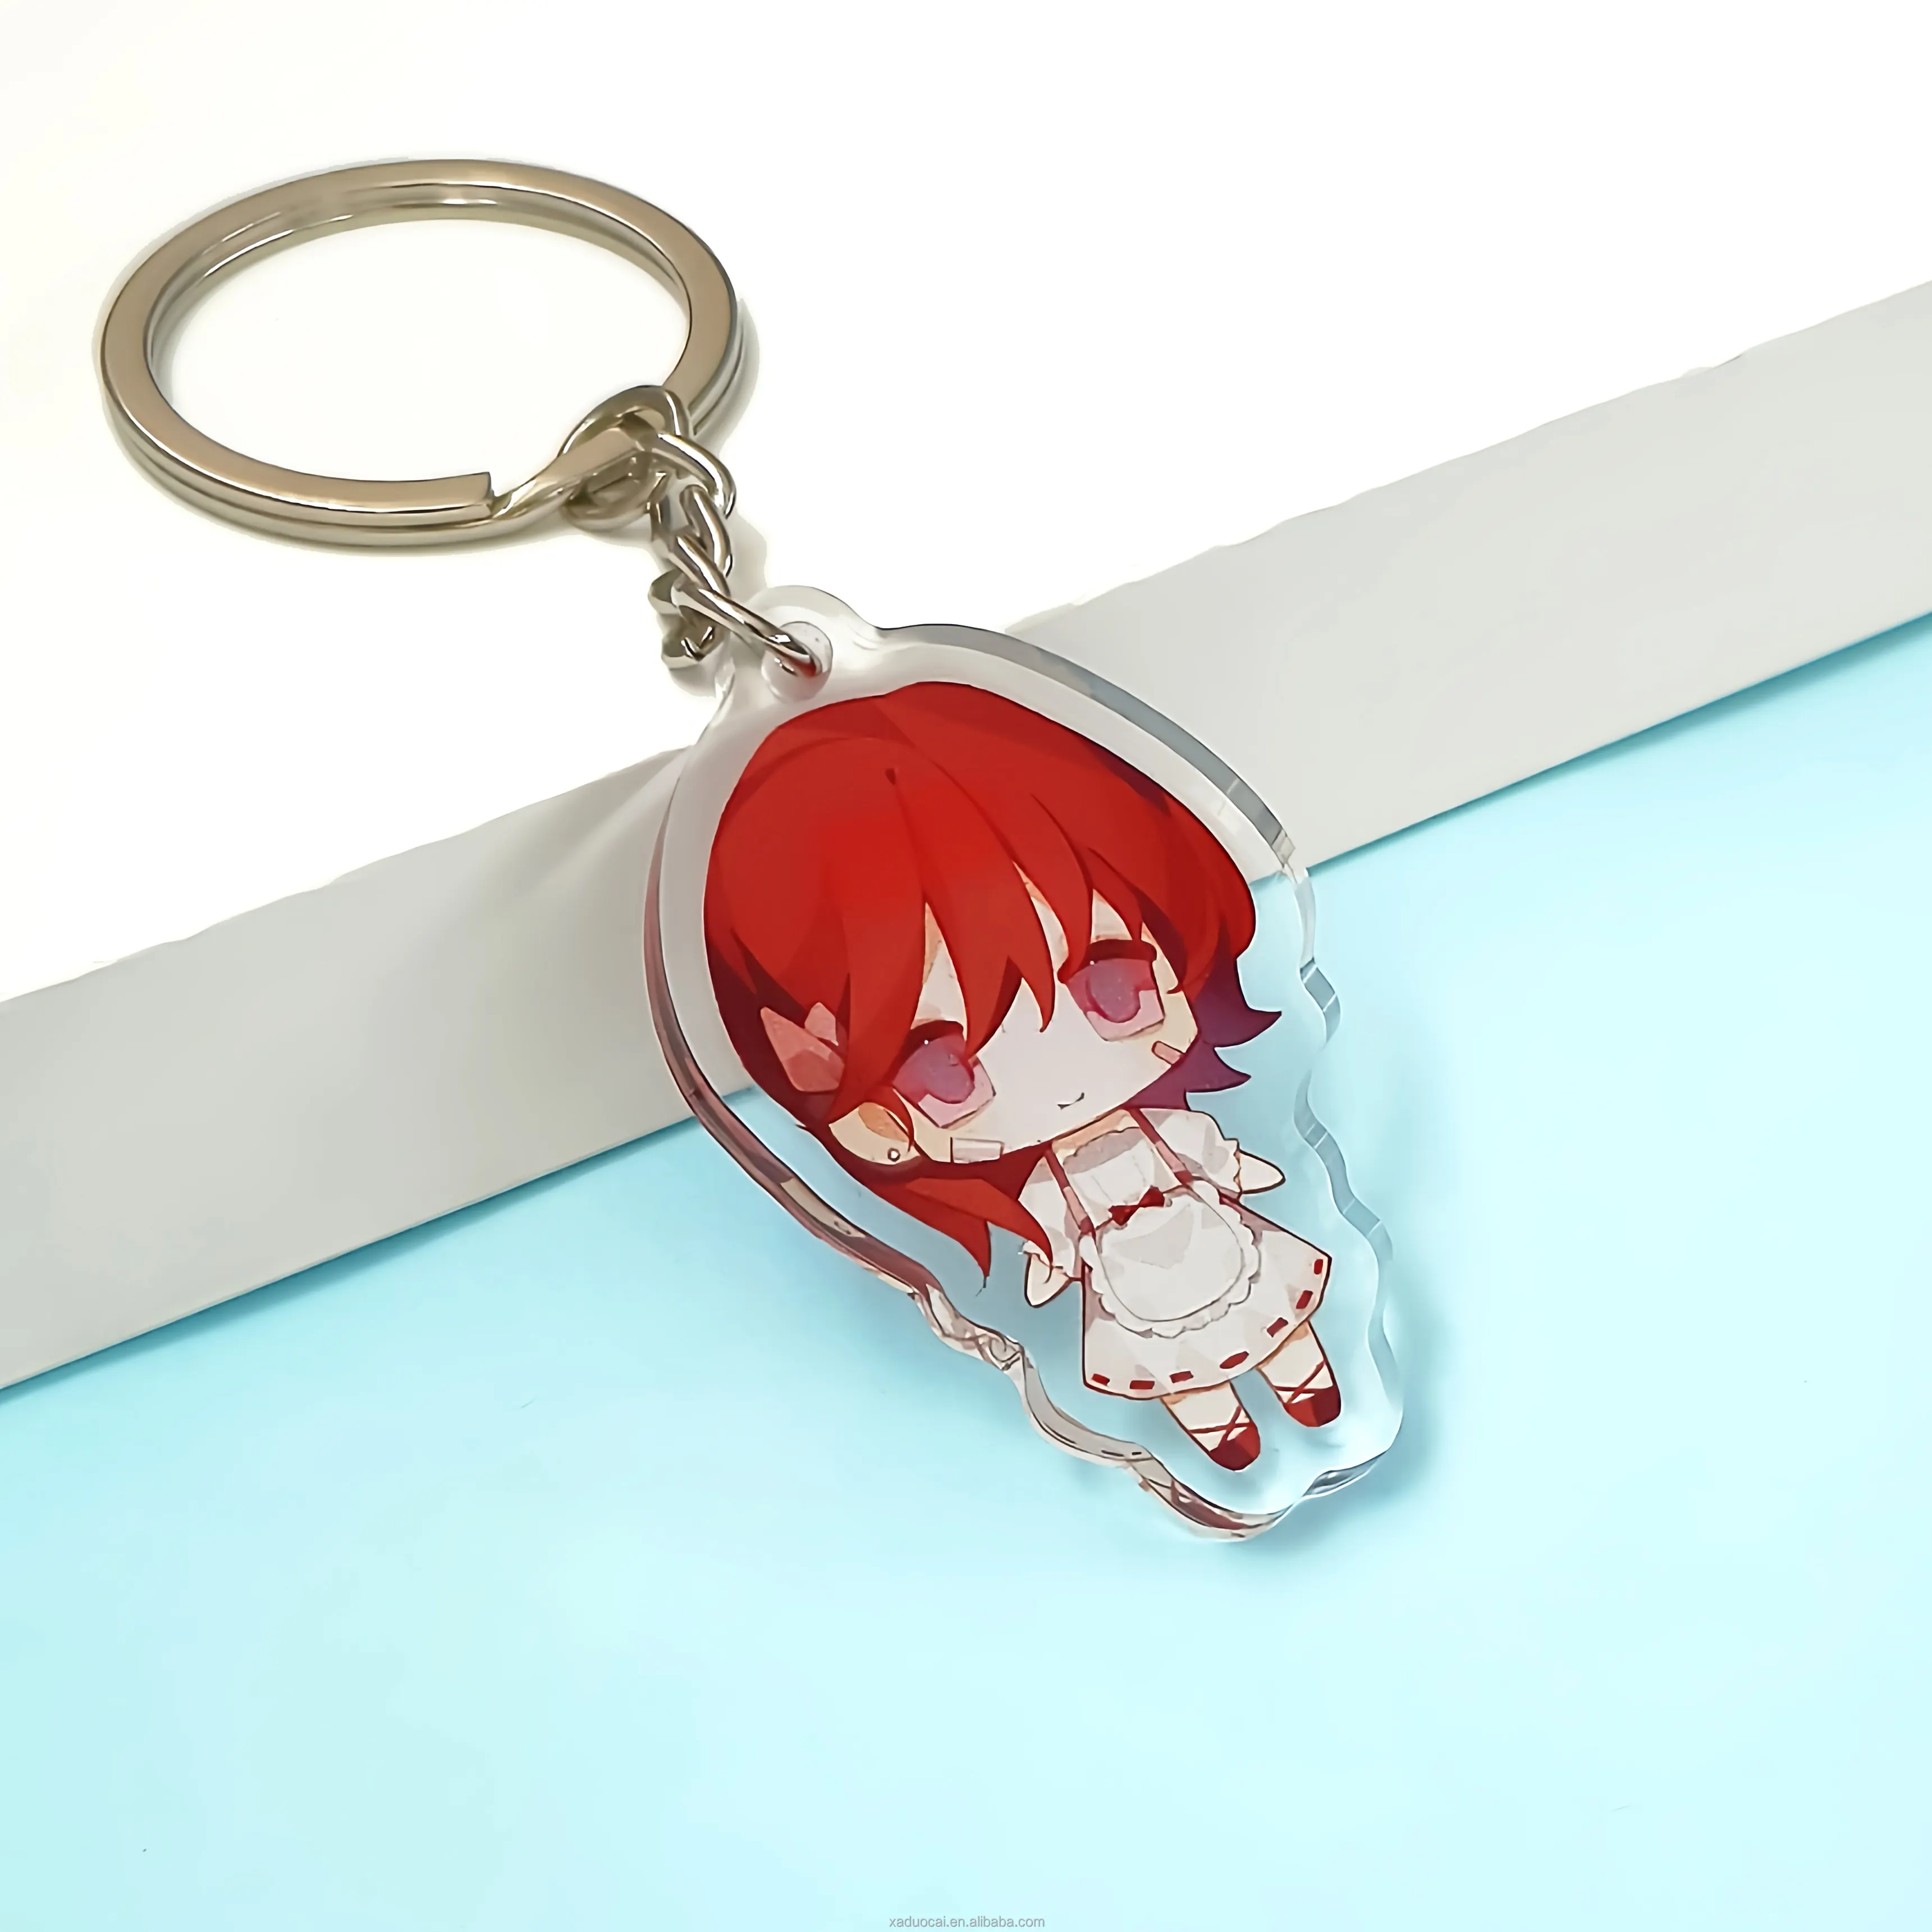 Custom Printed Transparent Acrylic Keychain Makes Your Own 6-Color UV Printed Stainless Steel Charm